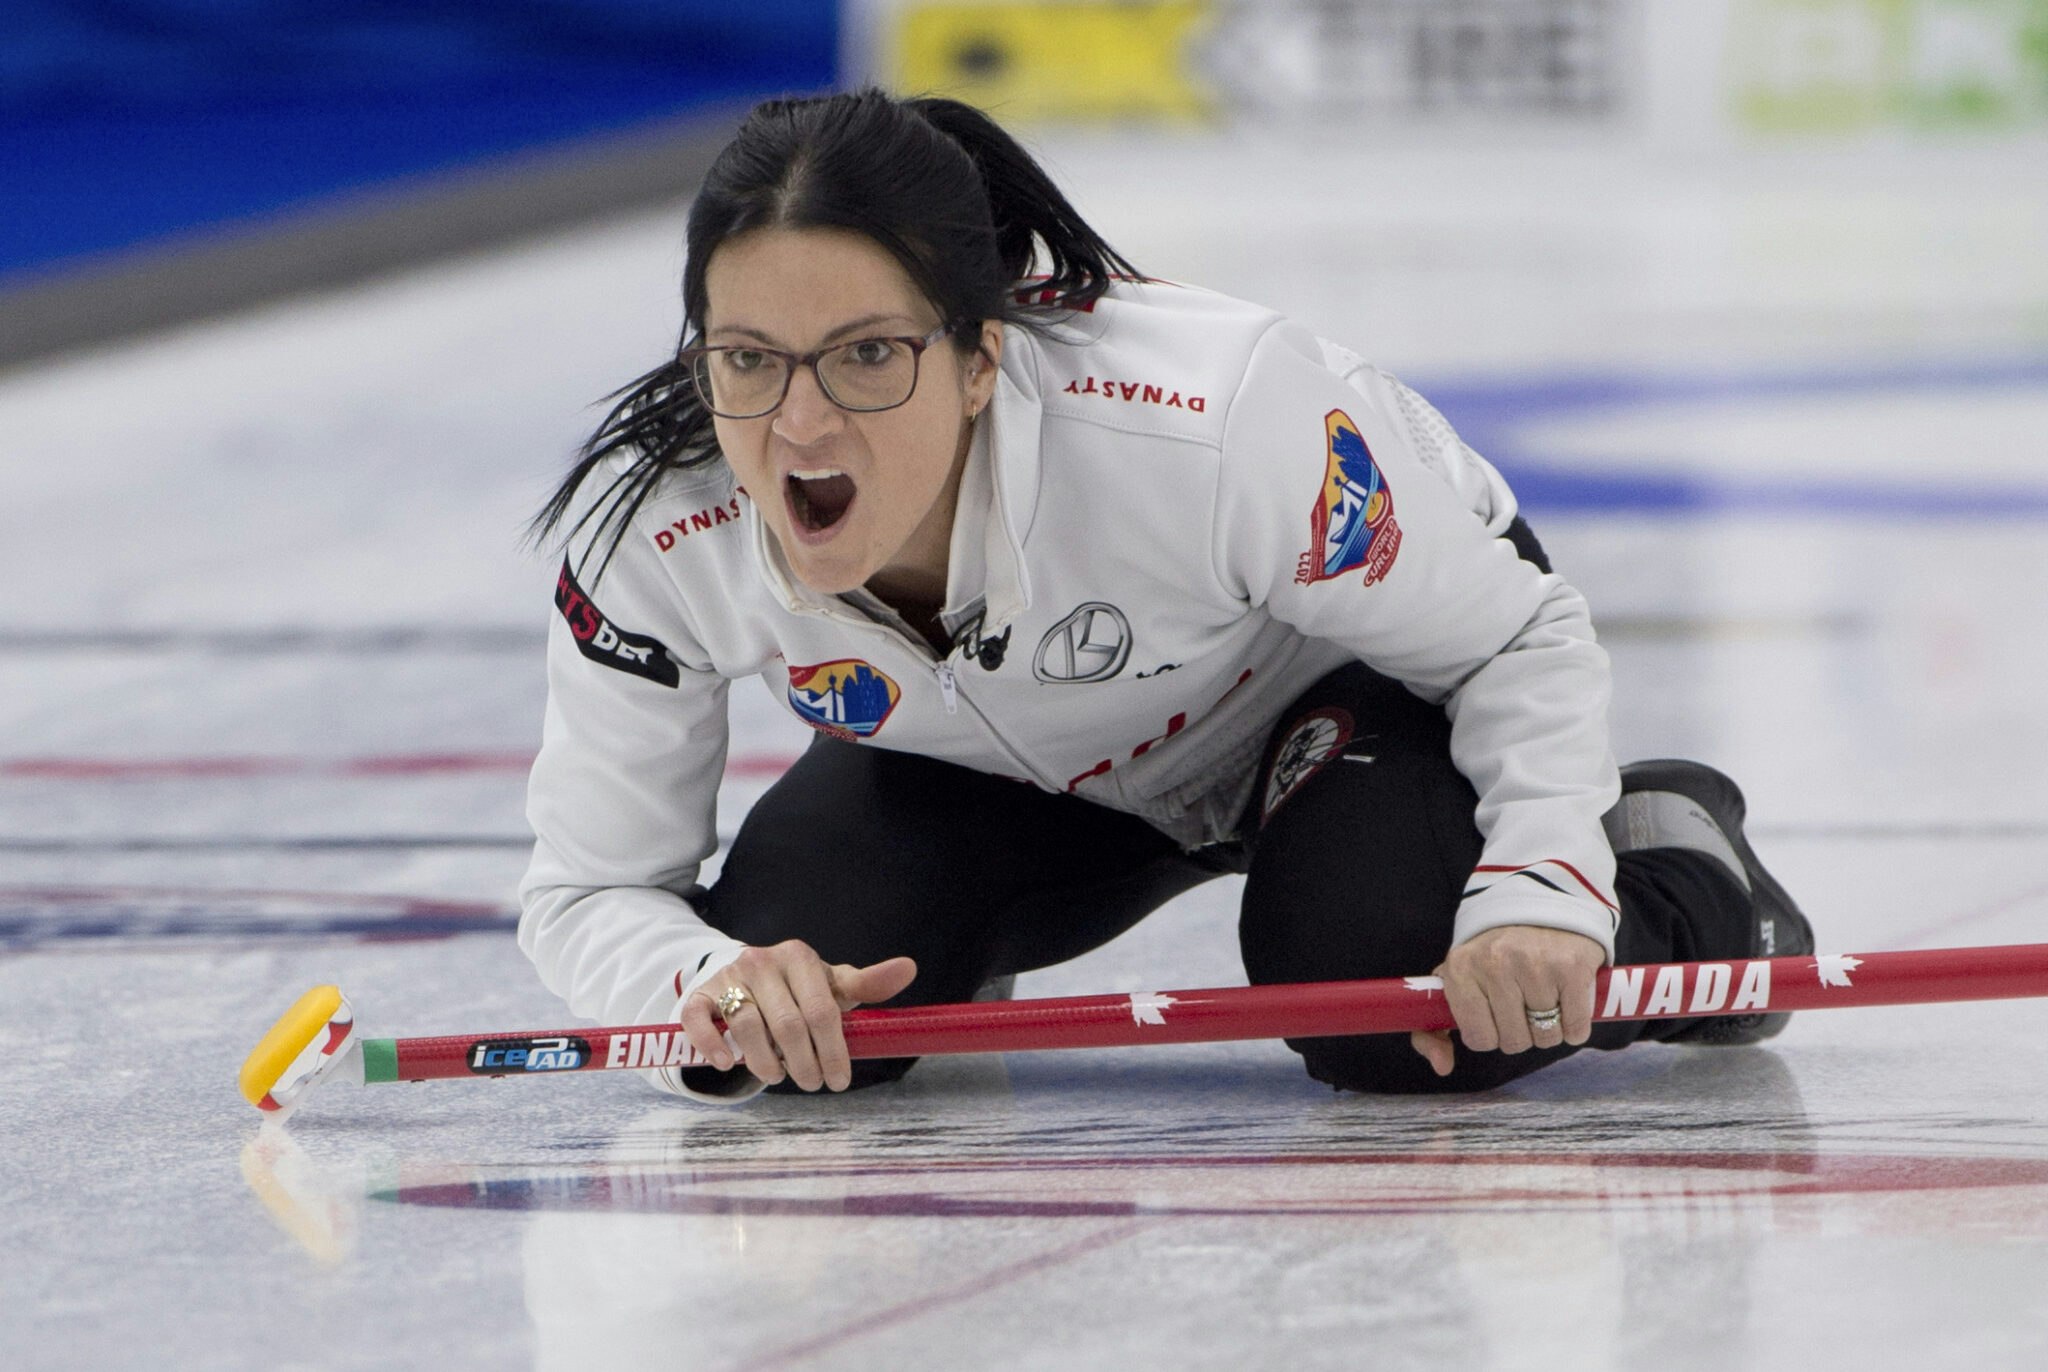 The Best Womens Curlers in Canada Headline the 2023 SCOTTIES TOURNAMENT OF HEARTS, Beginning February 17 on TSN